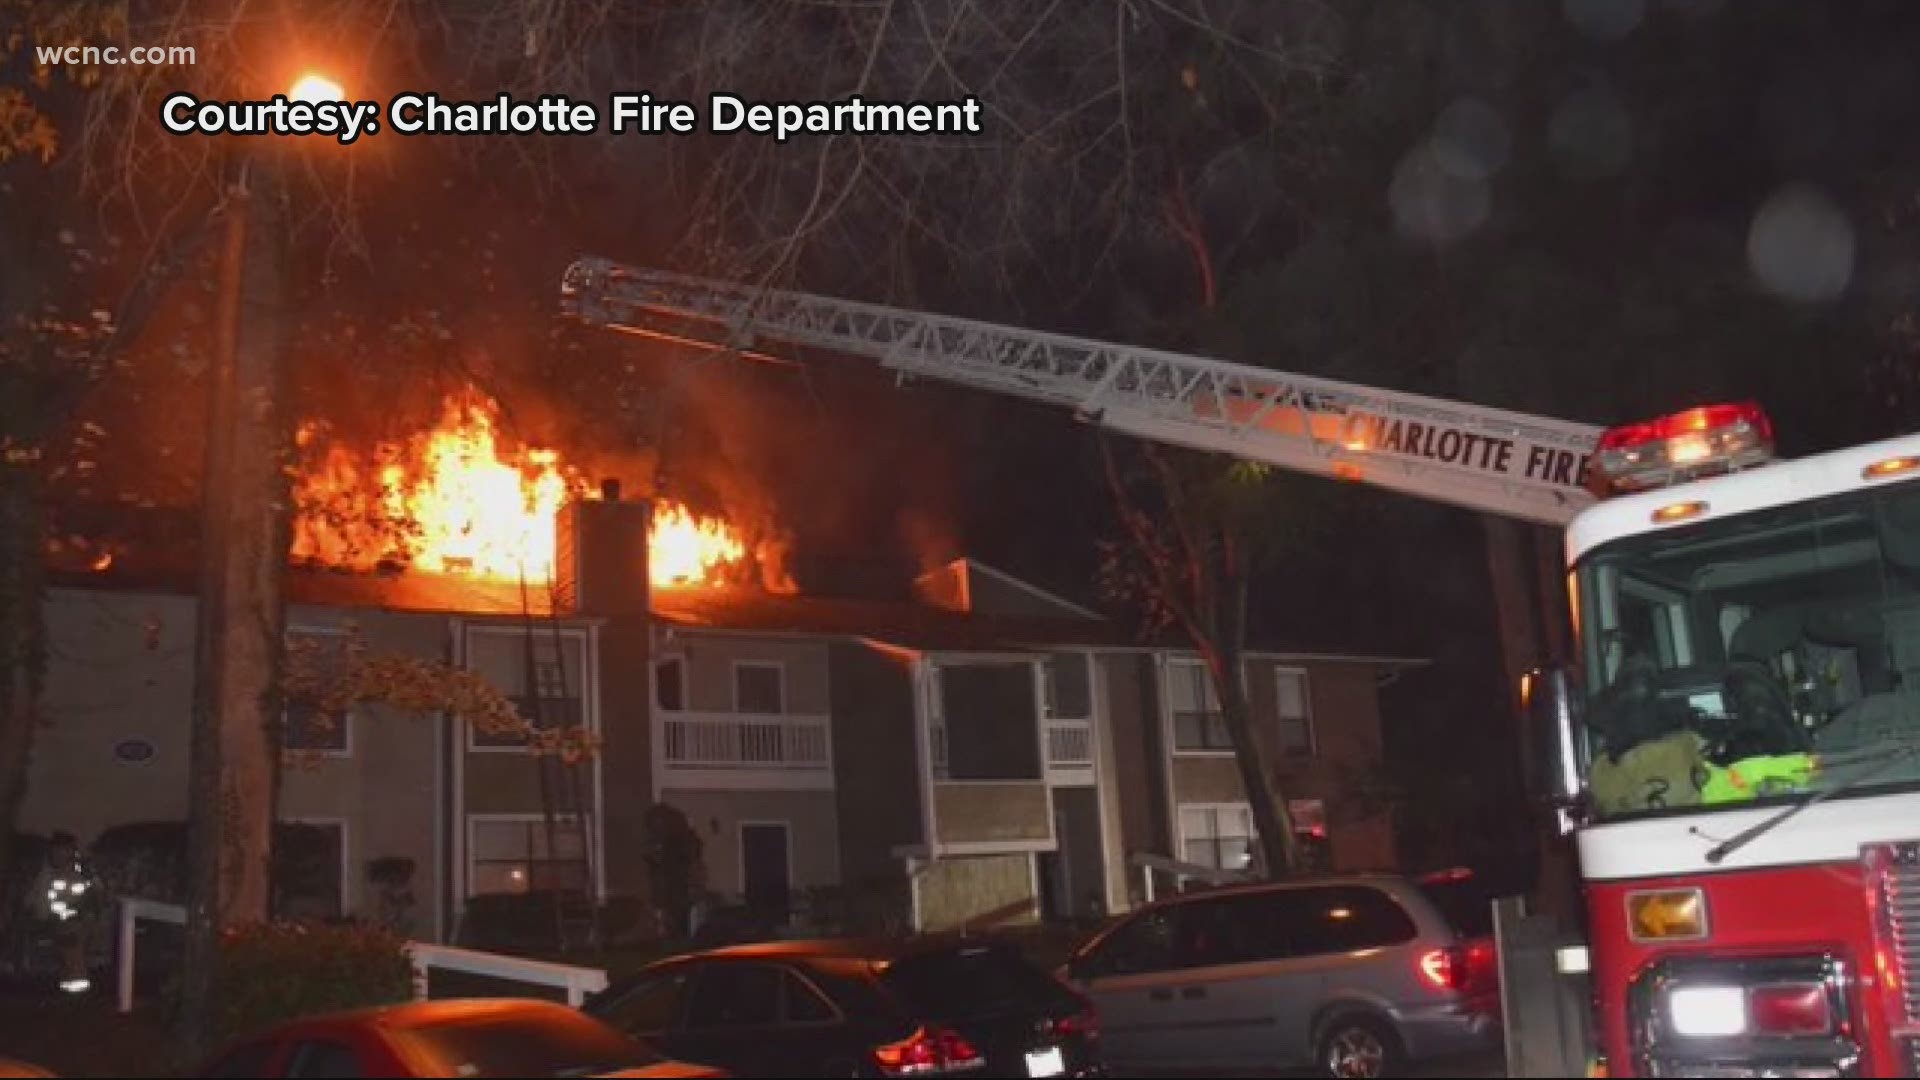 The fire started in the attic of a two-story apartment building off Scaleybark Road early Friday morning.